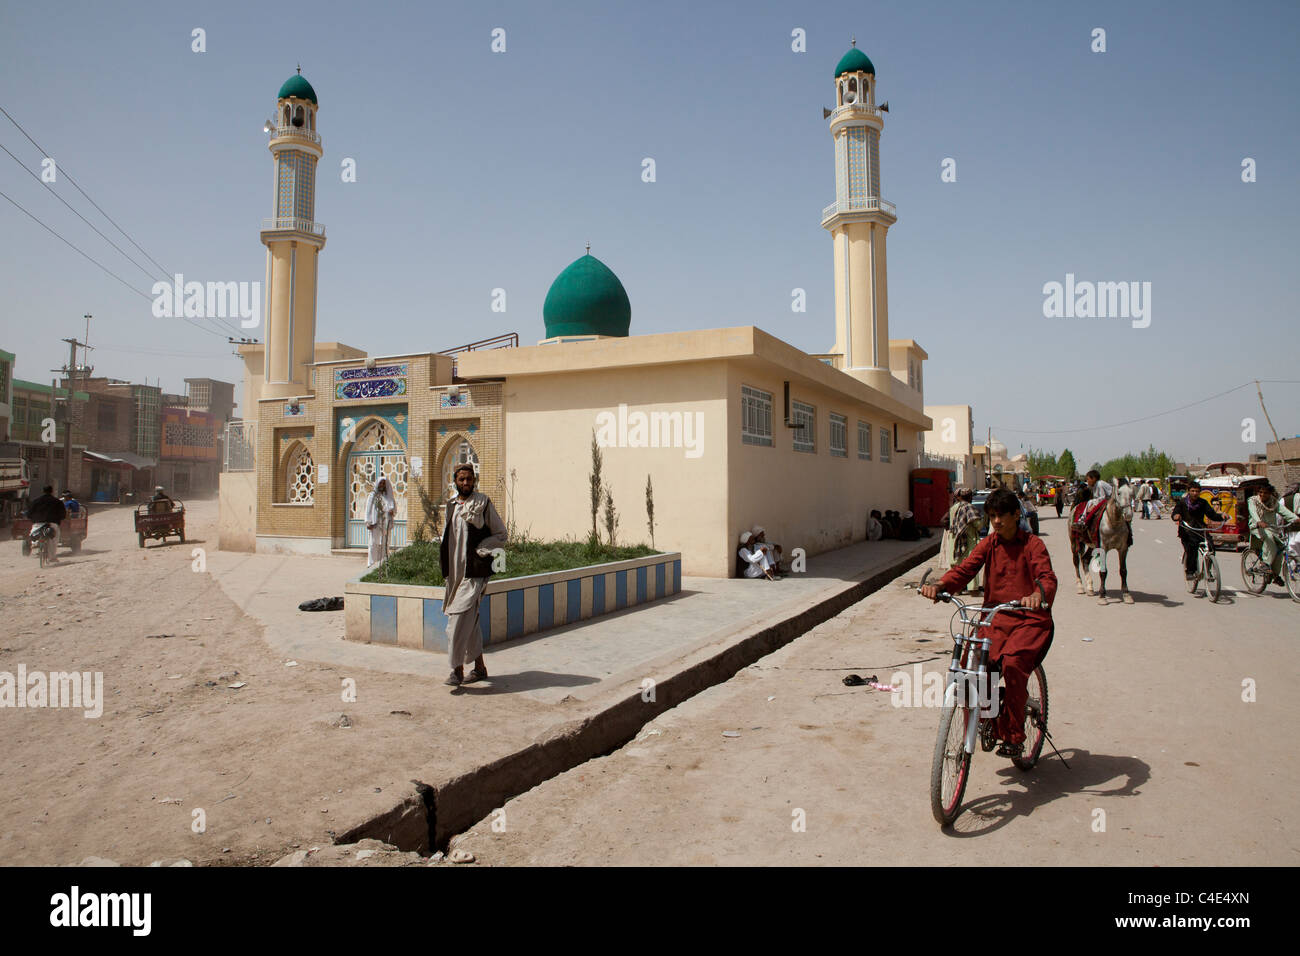 Moschea in Afghanistan Foto Stock